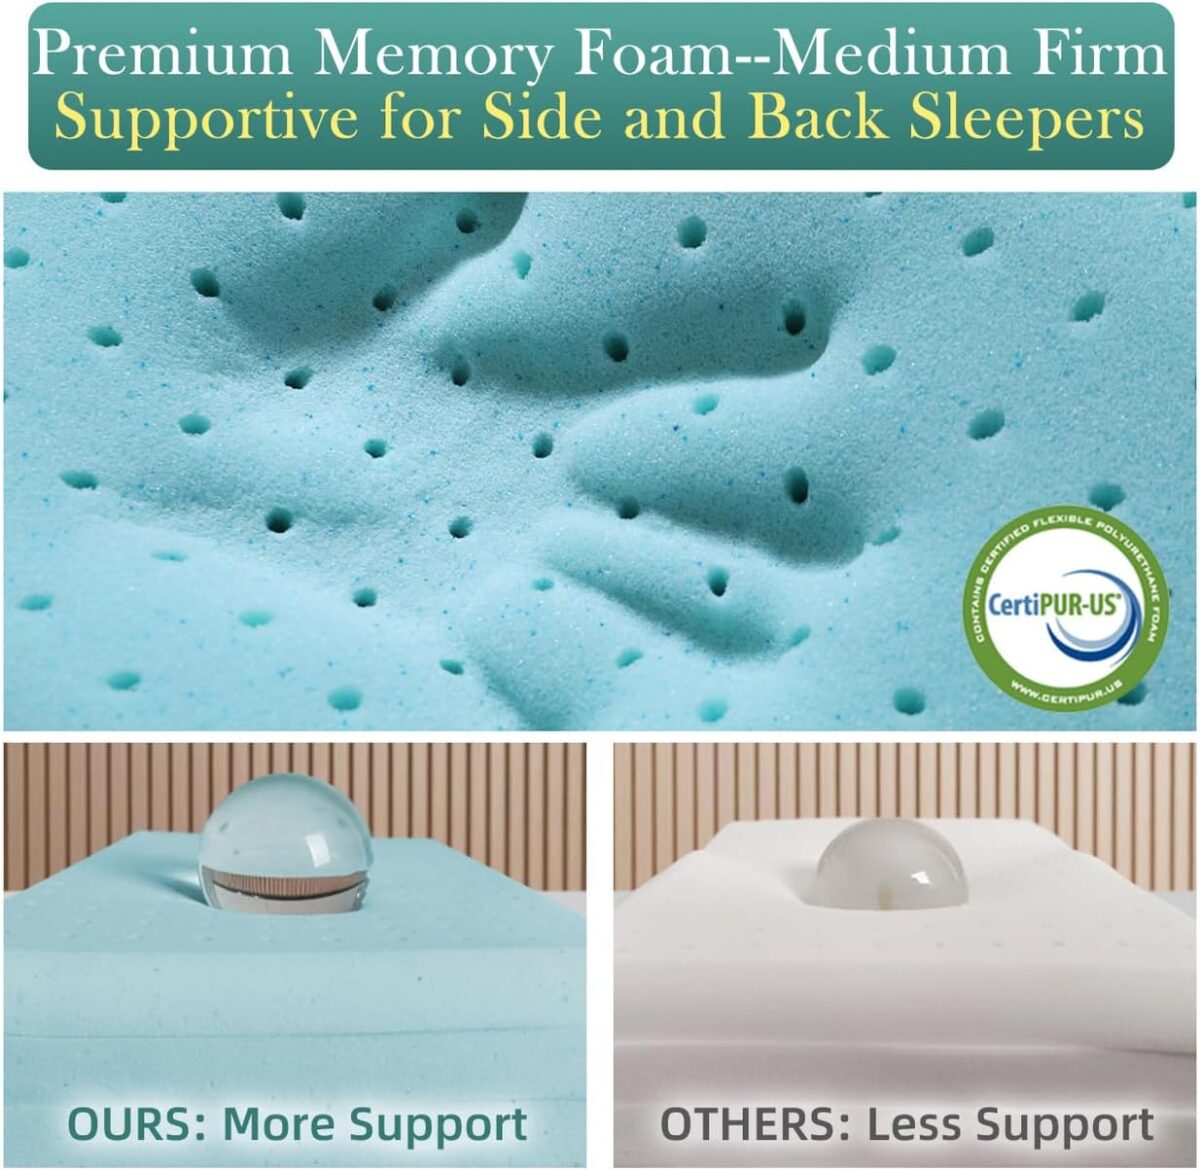 Adjustable Thin Memory Foam Pillow - 4 Heights from 1.2 to 4.8in, Cervical Pillow for Neck Pain Relief